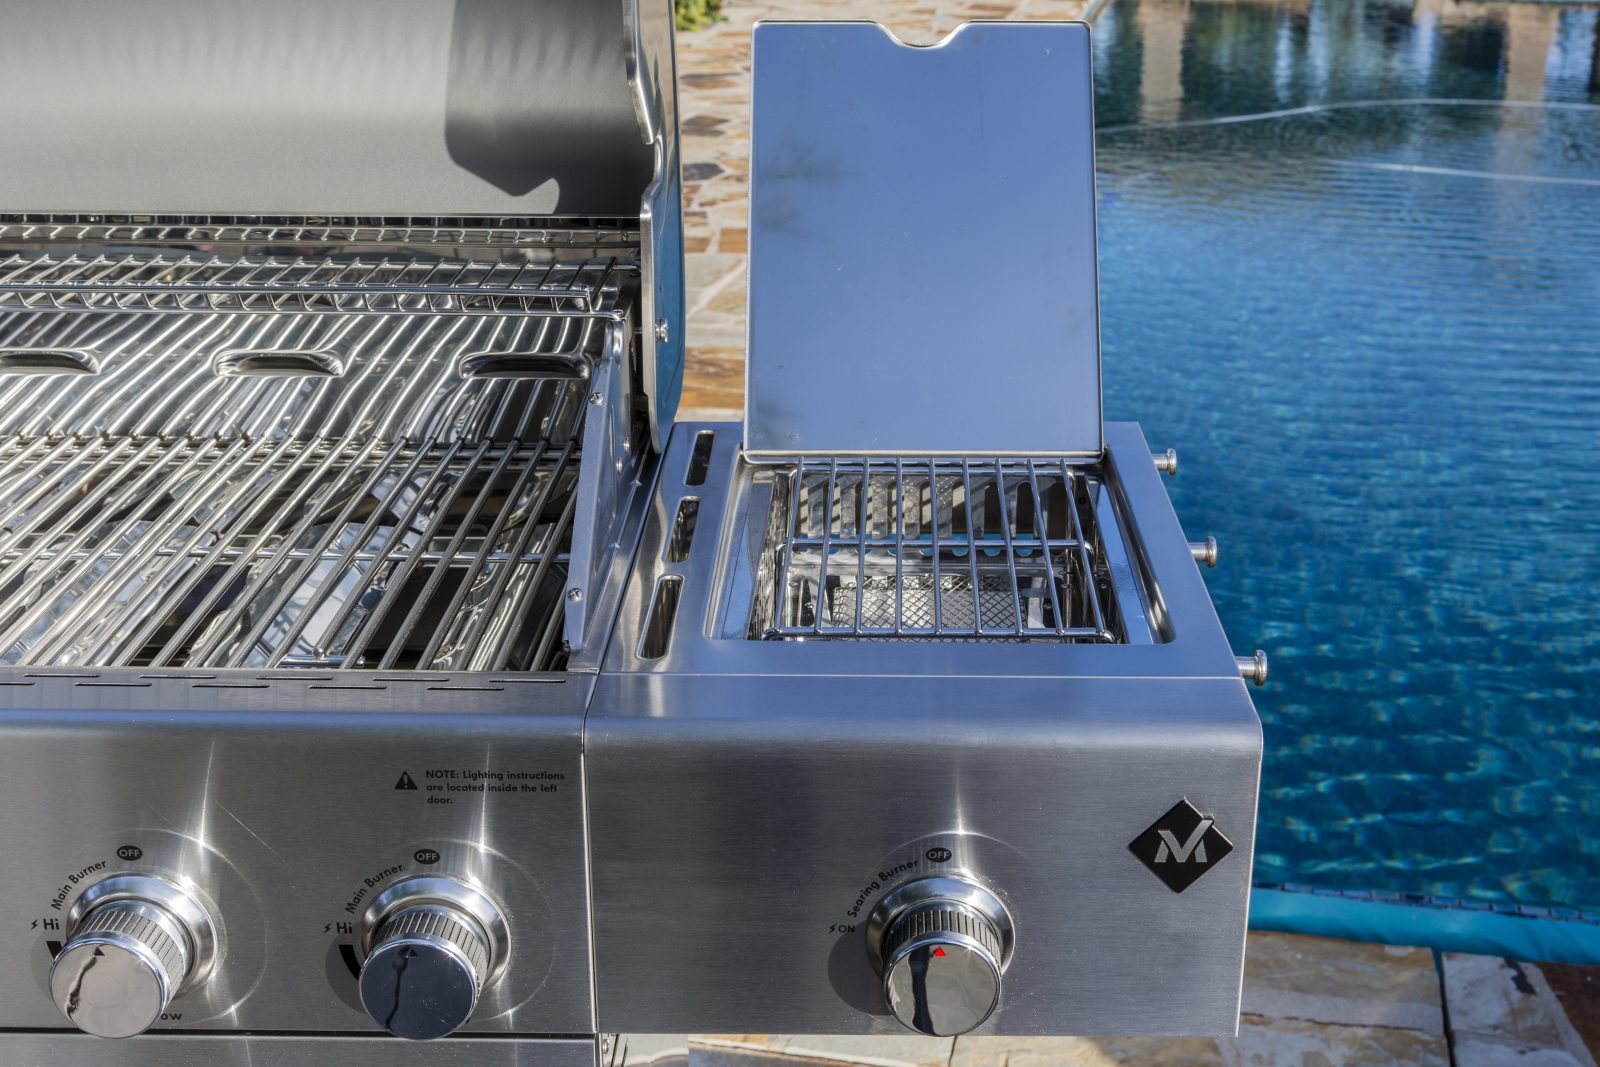 Safely Steam Cleaning Your Grill Grate – KitchenReady